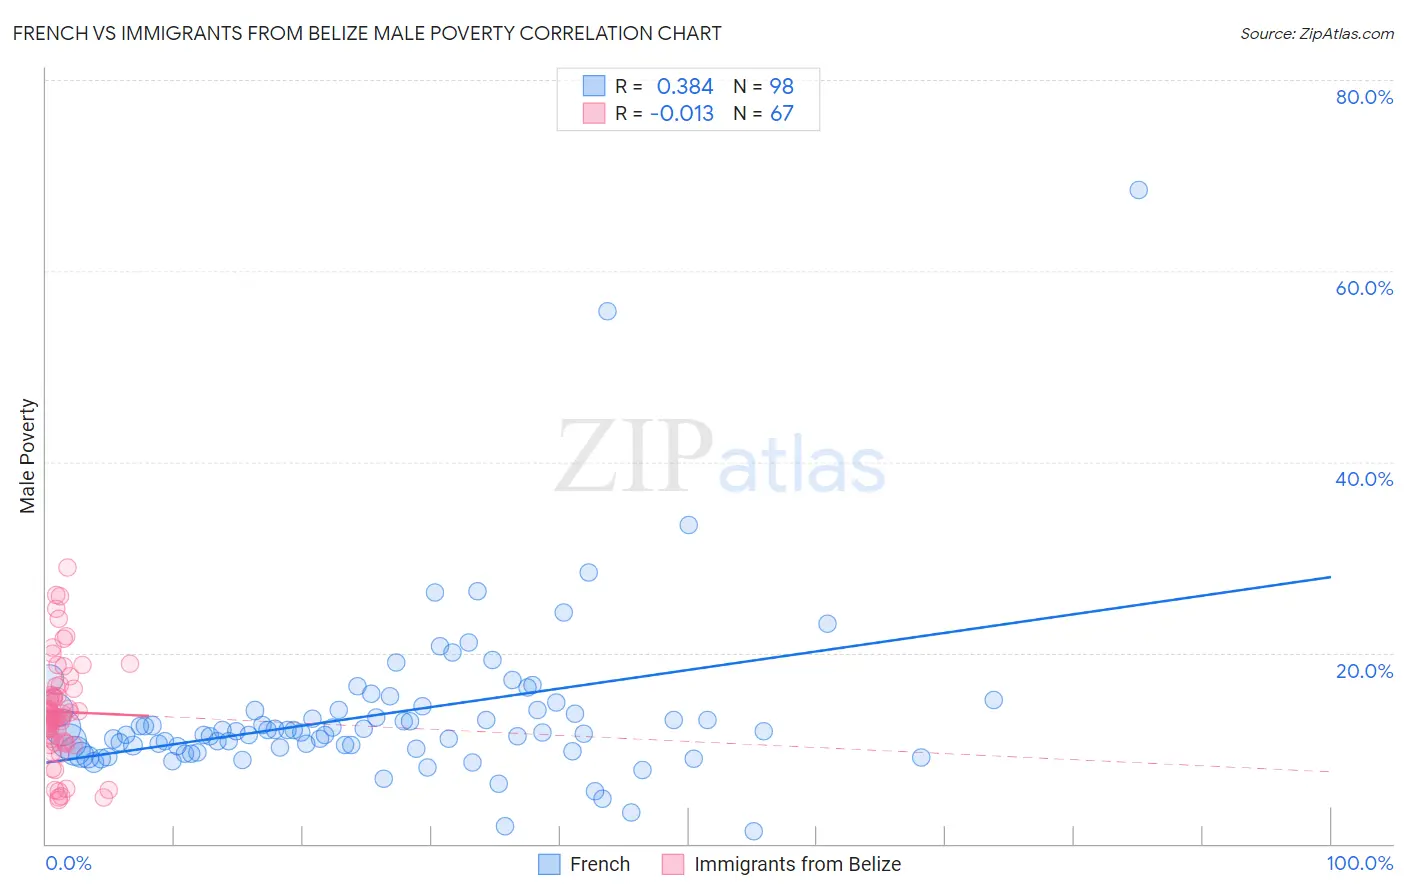 French vs Immigrants from Belize Male Poverty